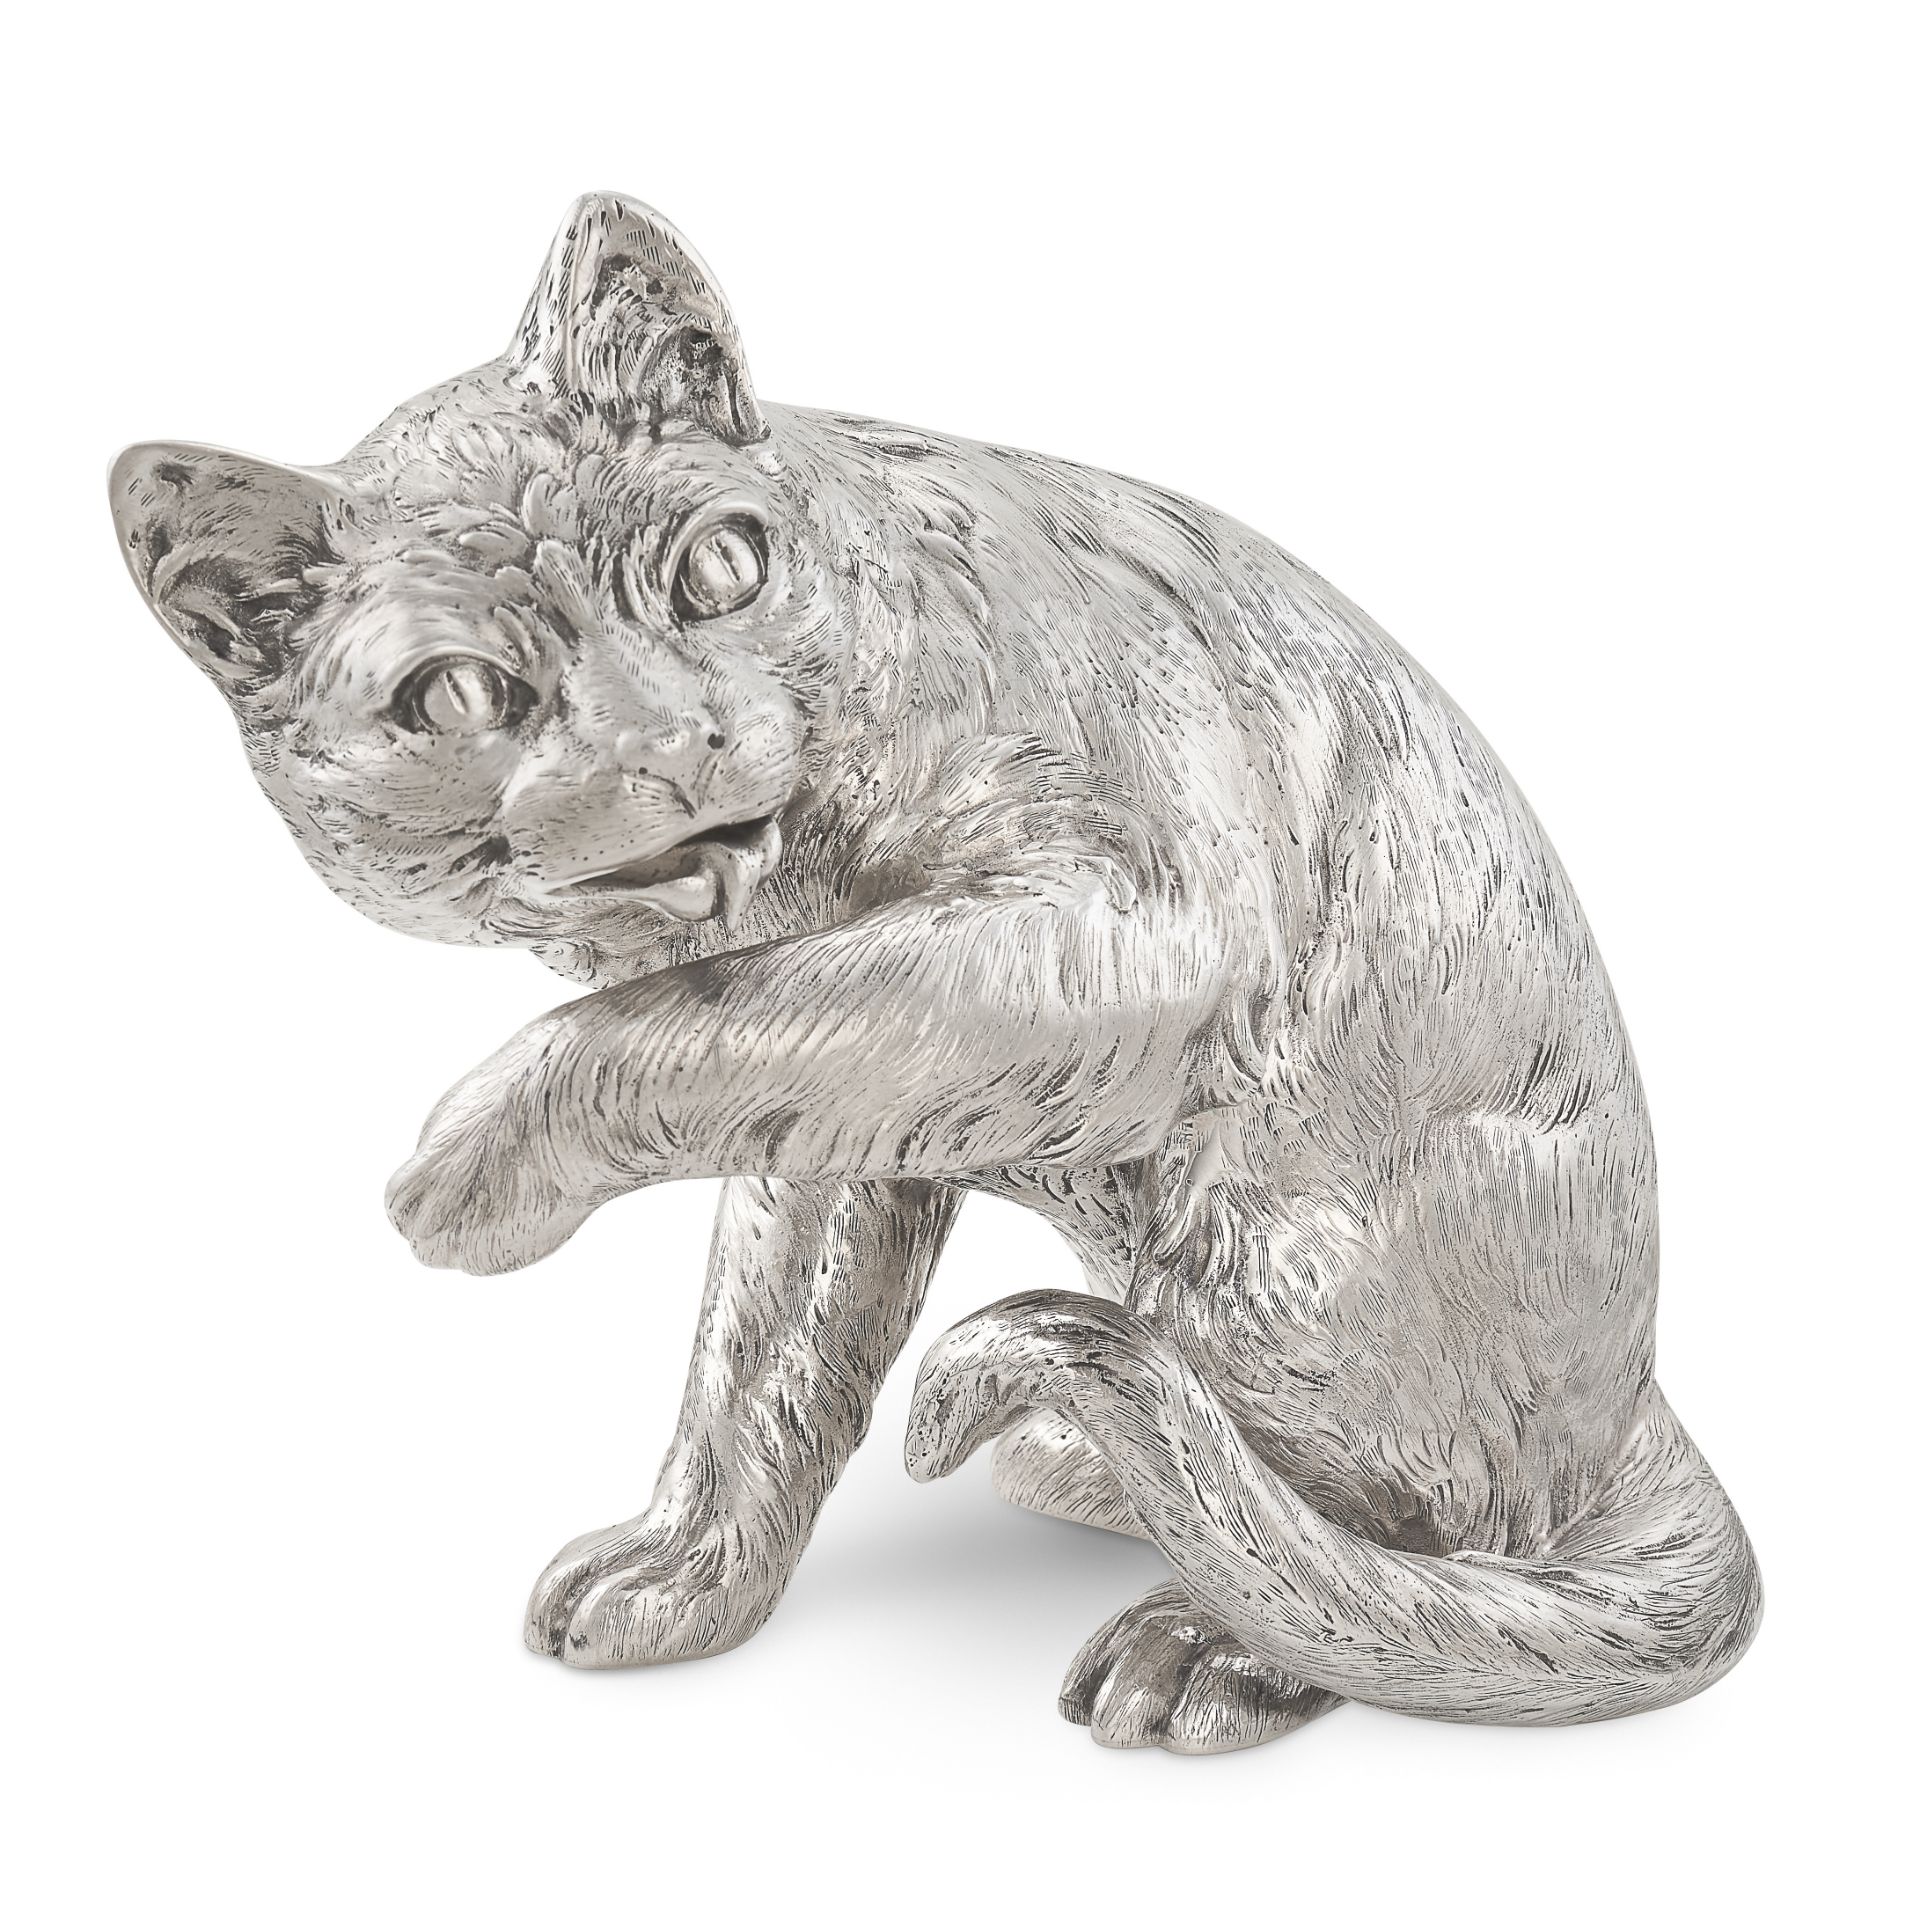 A RARE ANTIQUE GERMAN SILVER STATUE OF A CAT, CIRCA 1900 modelled realistically to depict a seated